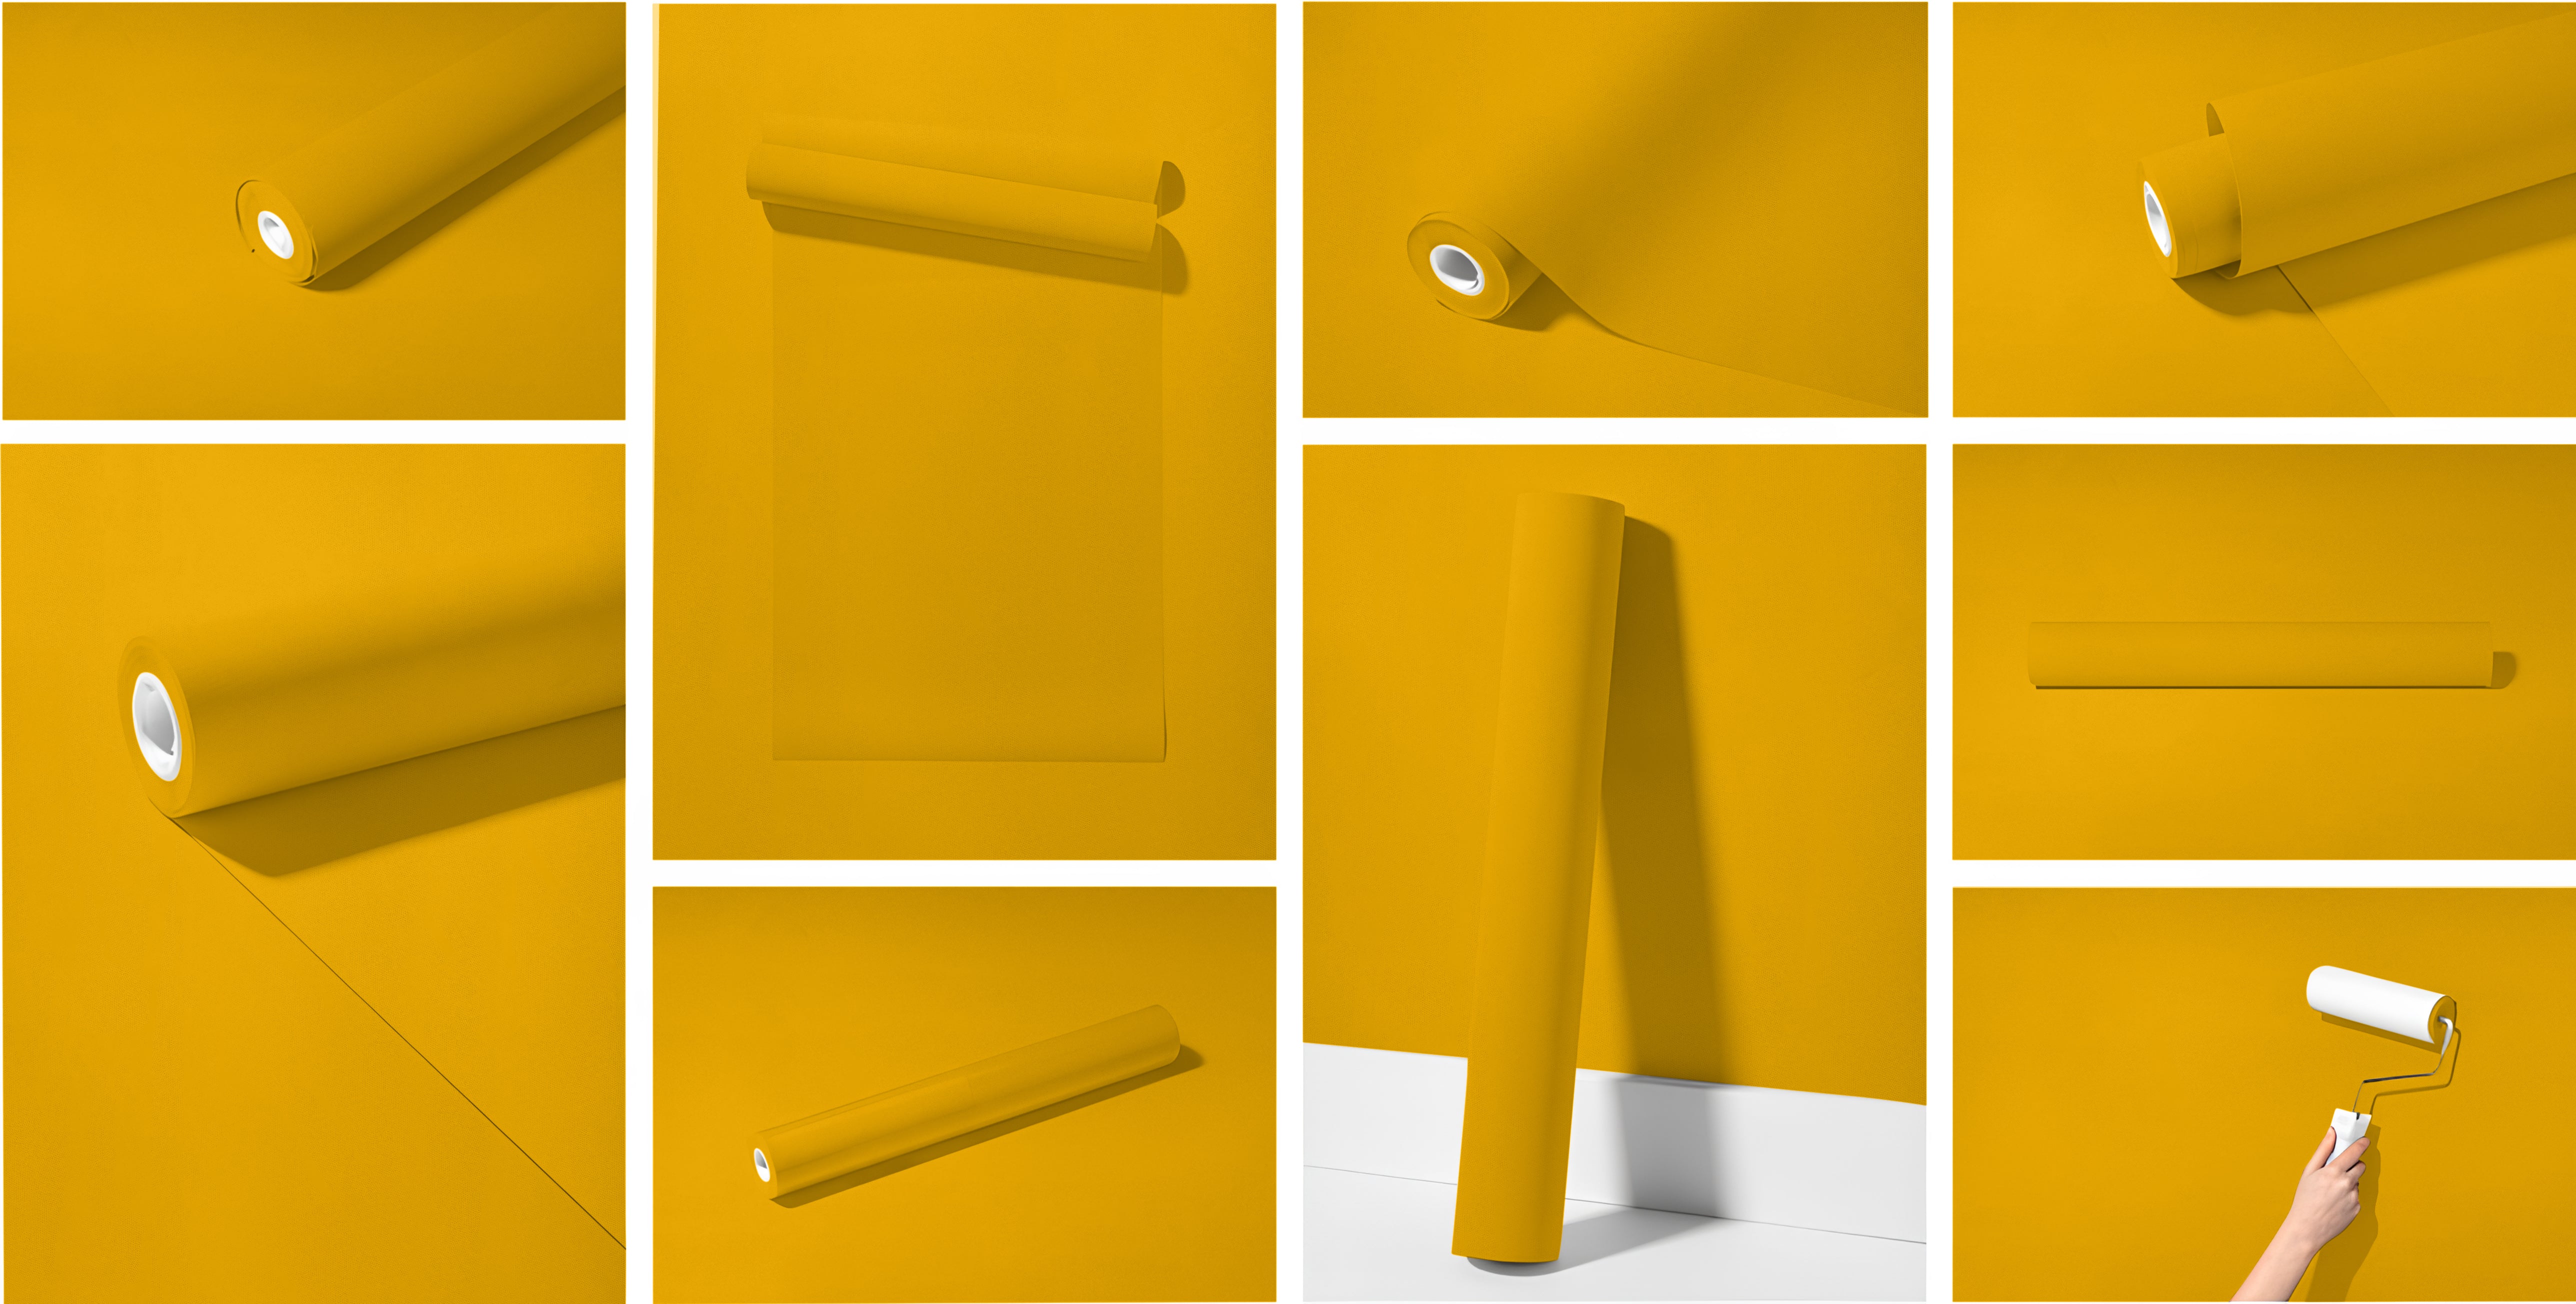 Peel & Stick Removable Re-usable Paint - Color RAL 1032 Broom Yellow - offRAL™ - RALRAW LLC, USA